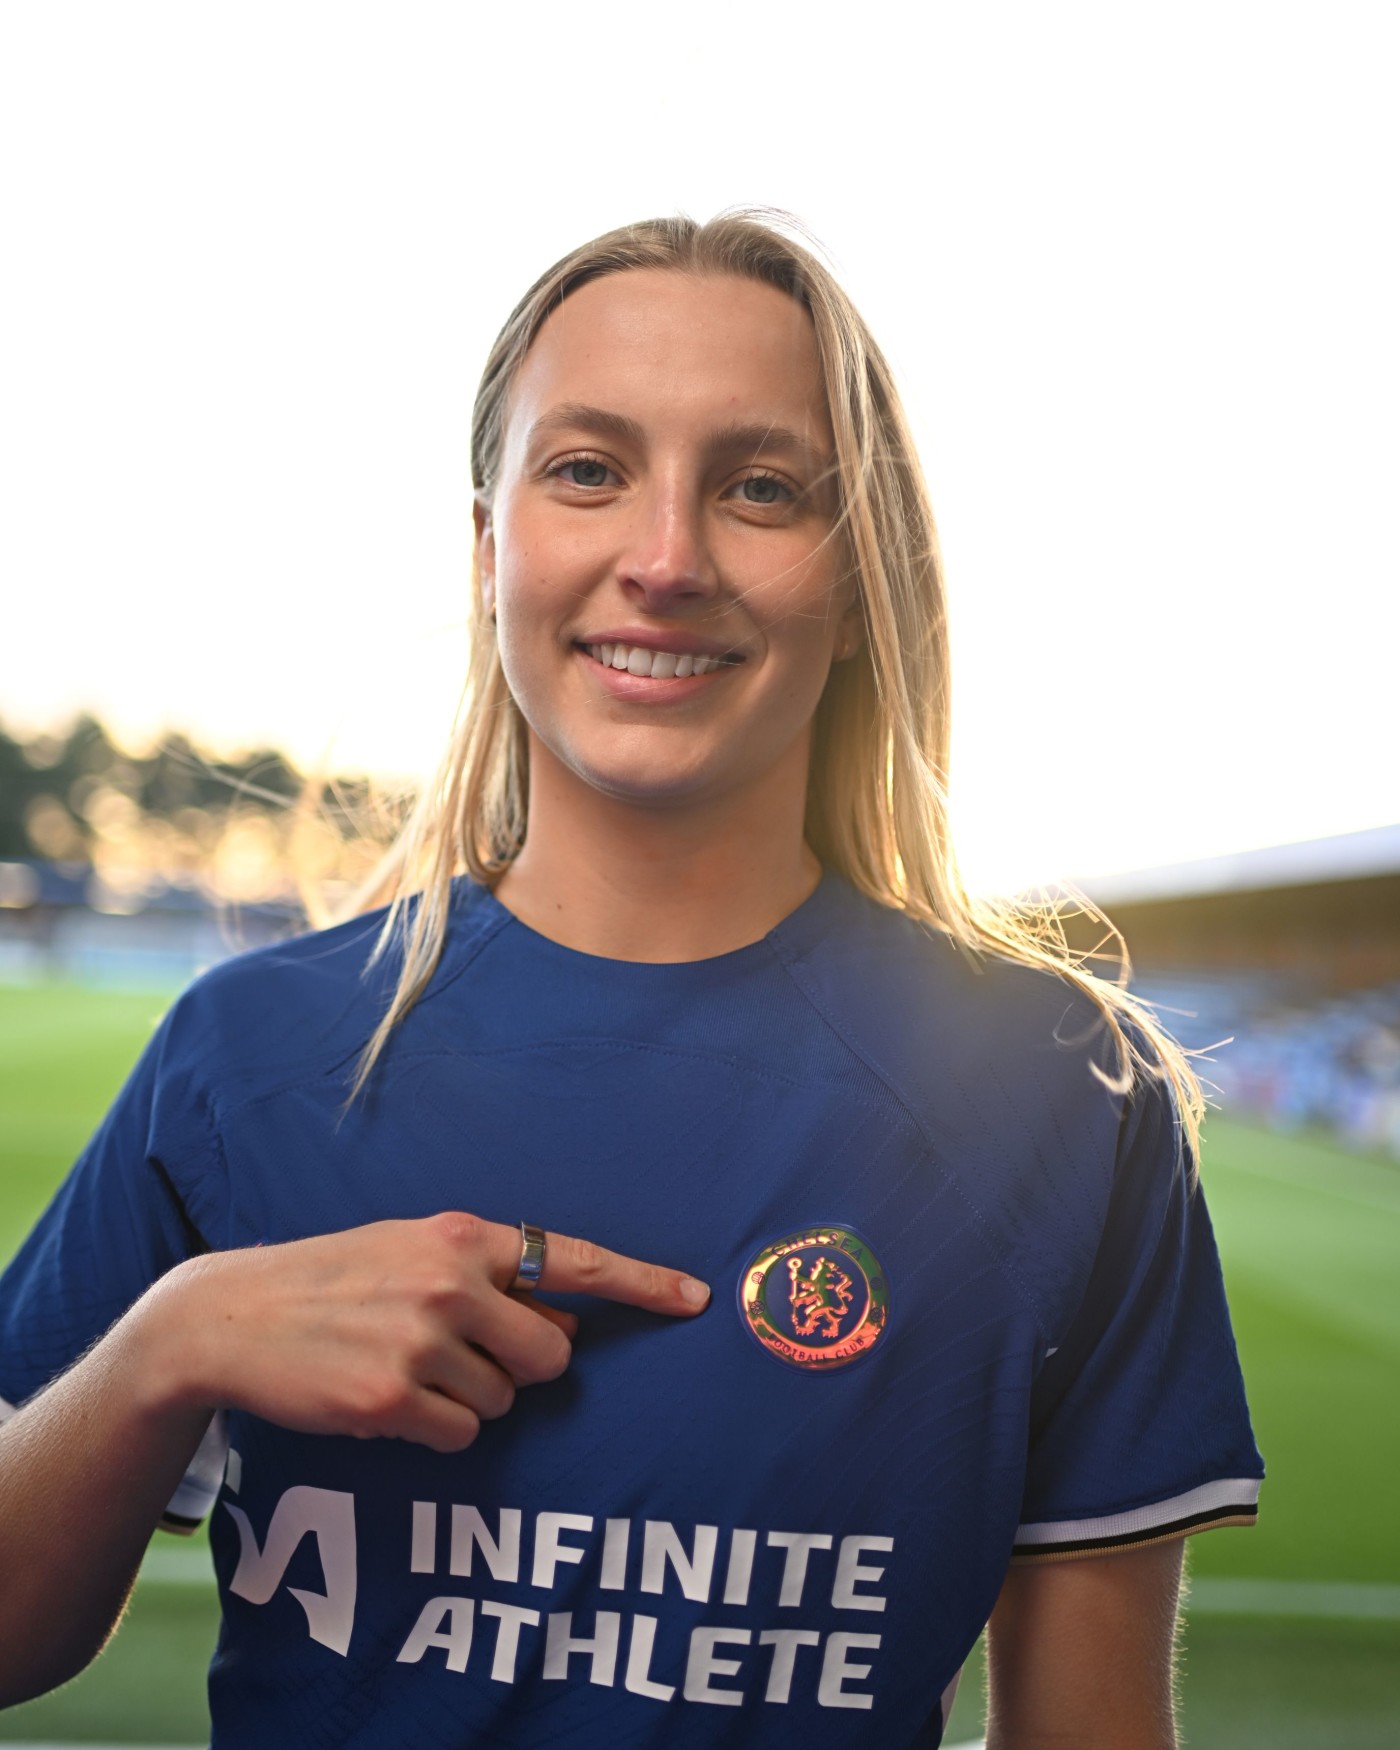 The 20-year-old netted her first Chelsea goal in a 4-2 league victory over Brighton at Kingsmeadow in October